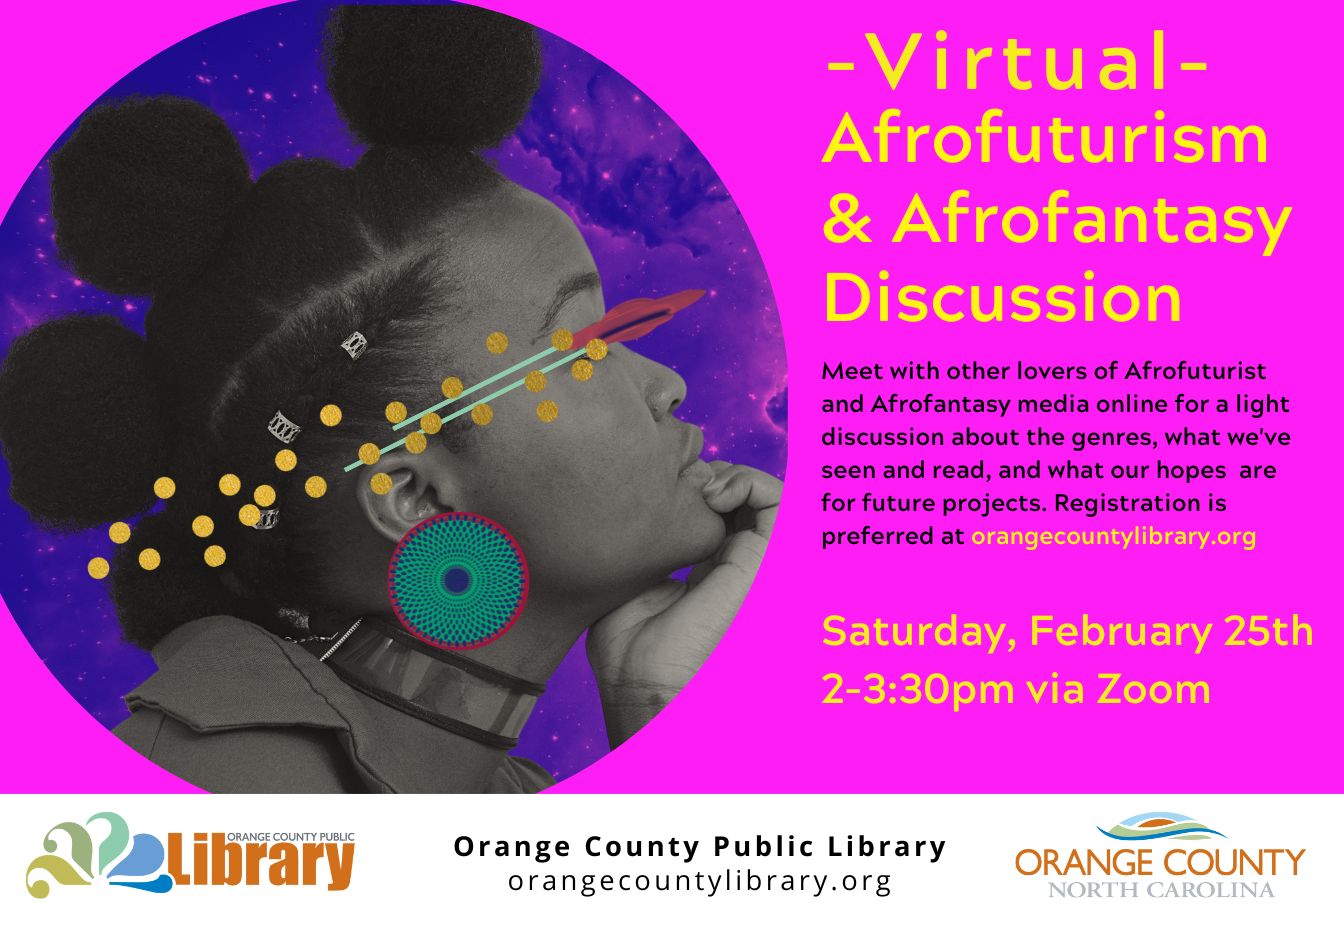 Virtual Afrofuturism & Afrofantasy Discussion | Saturday, February 25th 2023 from 2-3:30pm via Zoom.  Registration preferred. Meet with other lovers of Afrofuturist and Afrofantasy media online for a light discussion about the genres, what we've seen and read, and what our hopes are for future projects. This event may be recorded.